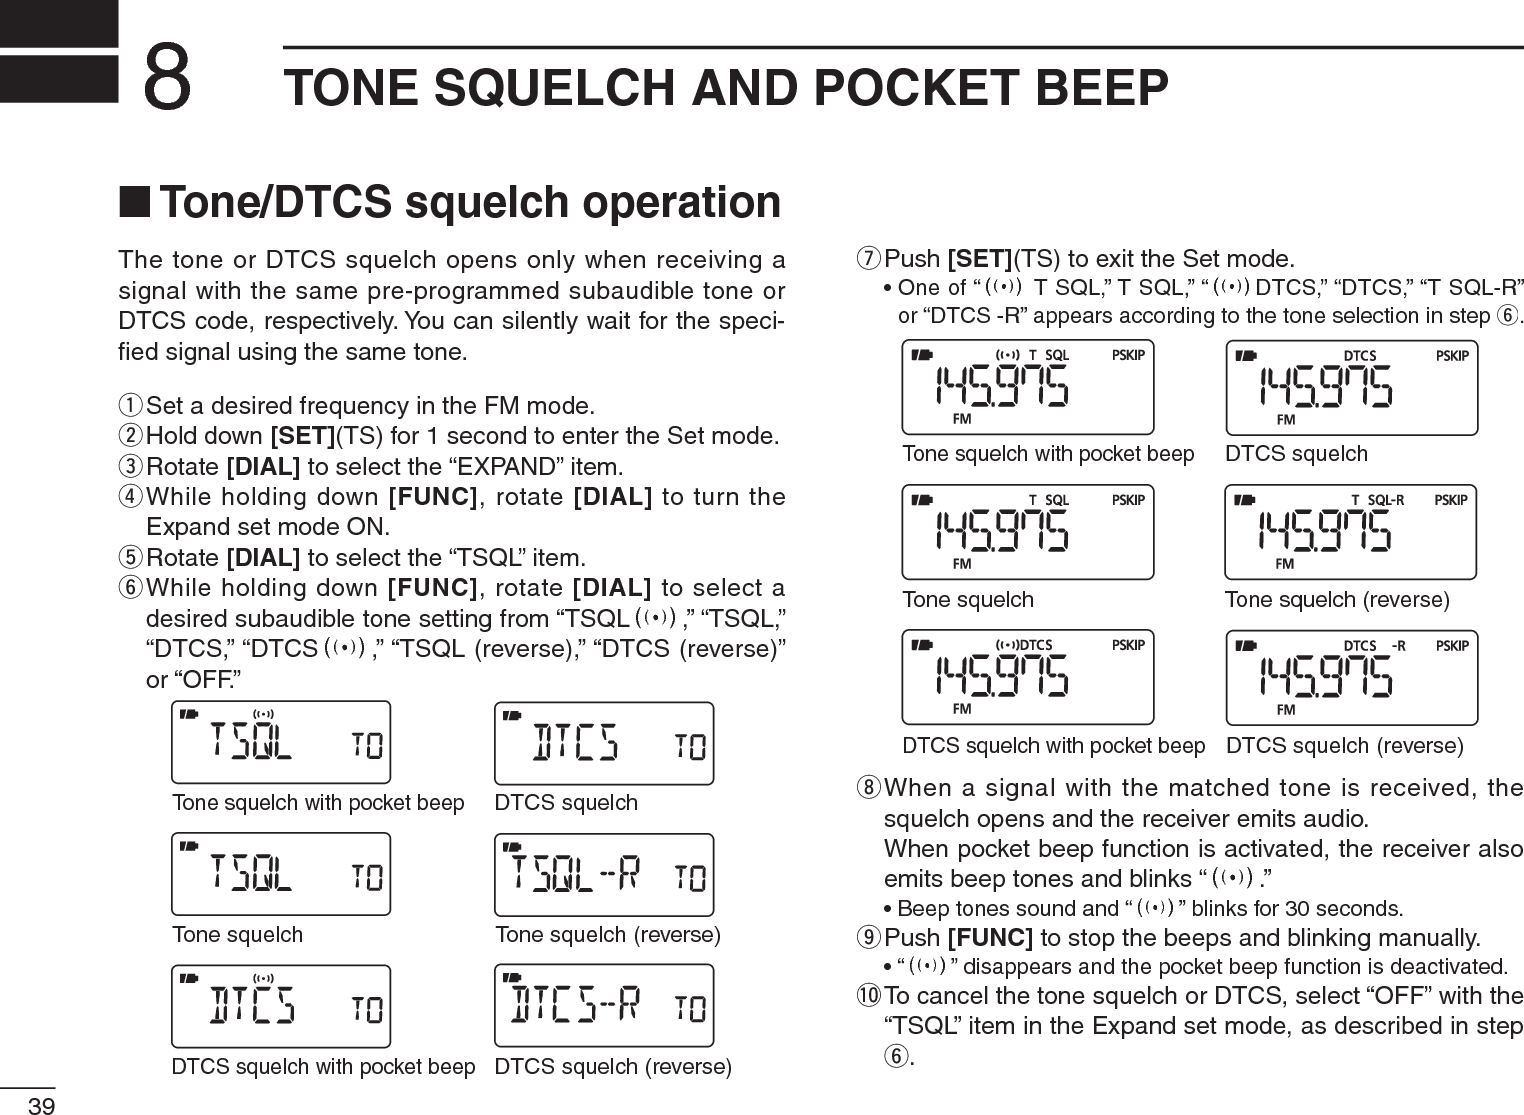 39TONE SQUELCH AND POCKET BEEP 8N Tone/DTCS squelch operationThe tone or DTCS squelch opens only when receiving a signal with the same pre-programmed subaudible tone or DTCS code, respectively. You can silently wait for the speci-ﬁed signal using the same tone.qSet a desired frequency in the FM mode.wHold down [SET](TS) for 1 second to enter the Set mode.eRotate [DIAL] to select the “EXPAND” item.r  While holding down [FUNC], rotate [DIAL] to turn the Expand set mode ON.tRotate [DIAL] to select the “TSQL” item.y  While holding down [FUNC], rotate [DIAL] to select a desired subaudible tone setting from “TSQLS,” “TSQL,” “DTCS,” “DTCSS,” “TSQL (reverse),” “DTCS (reverse)” or “OFF.”Tone squelchDTCS squelchTone squelch (reverse)DTCS squelch (reverse)Tone squelch with pocket beepDTCS squelch with pocket beepuPush [SET](TS) to exit the Set mode.• One of “S T SQL,” T SQL,” “SDTCS,” “DTCS,” “T SQL-R” or “DTCS -R” appears according to the tone selection in step y.Tone squelchDTCS squelchDTCS squelch (reverse)Tone squelch (reverse)Tone squelch with pocket beepDTCS squelch with pocket beepi  When a signal with the matched tone is received, the squelch opens and the receiver emits audio.   When pocket beep function is activated, the receiver also emits beep tones and blinks “S.”• Beep tones sound and “S” blinks for 30 seconds.oPush [FUNC] to stop the beeps and blinking manually.• “S” disappears and the pocket beep function is deactivated.!0  To cancel the tone squelch or DTCS, select “OFF” with the “TSQL” item in the Expand set mode, as described in step y.